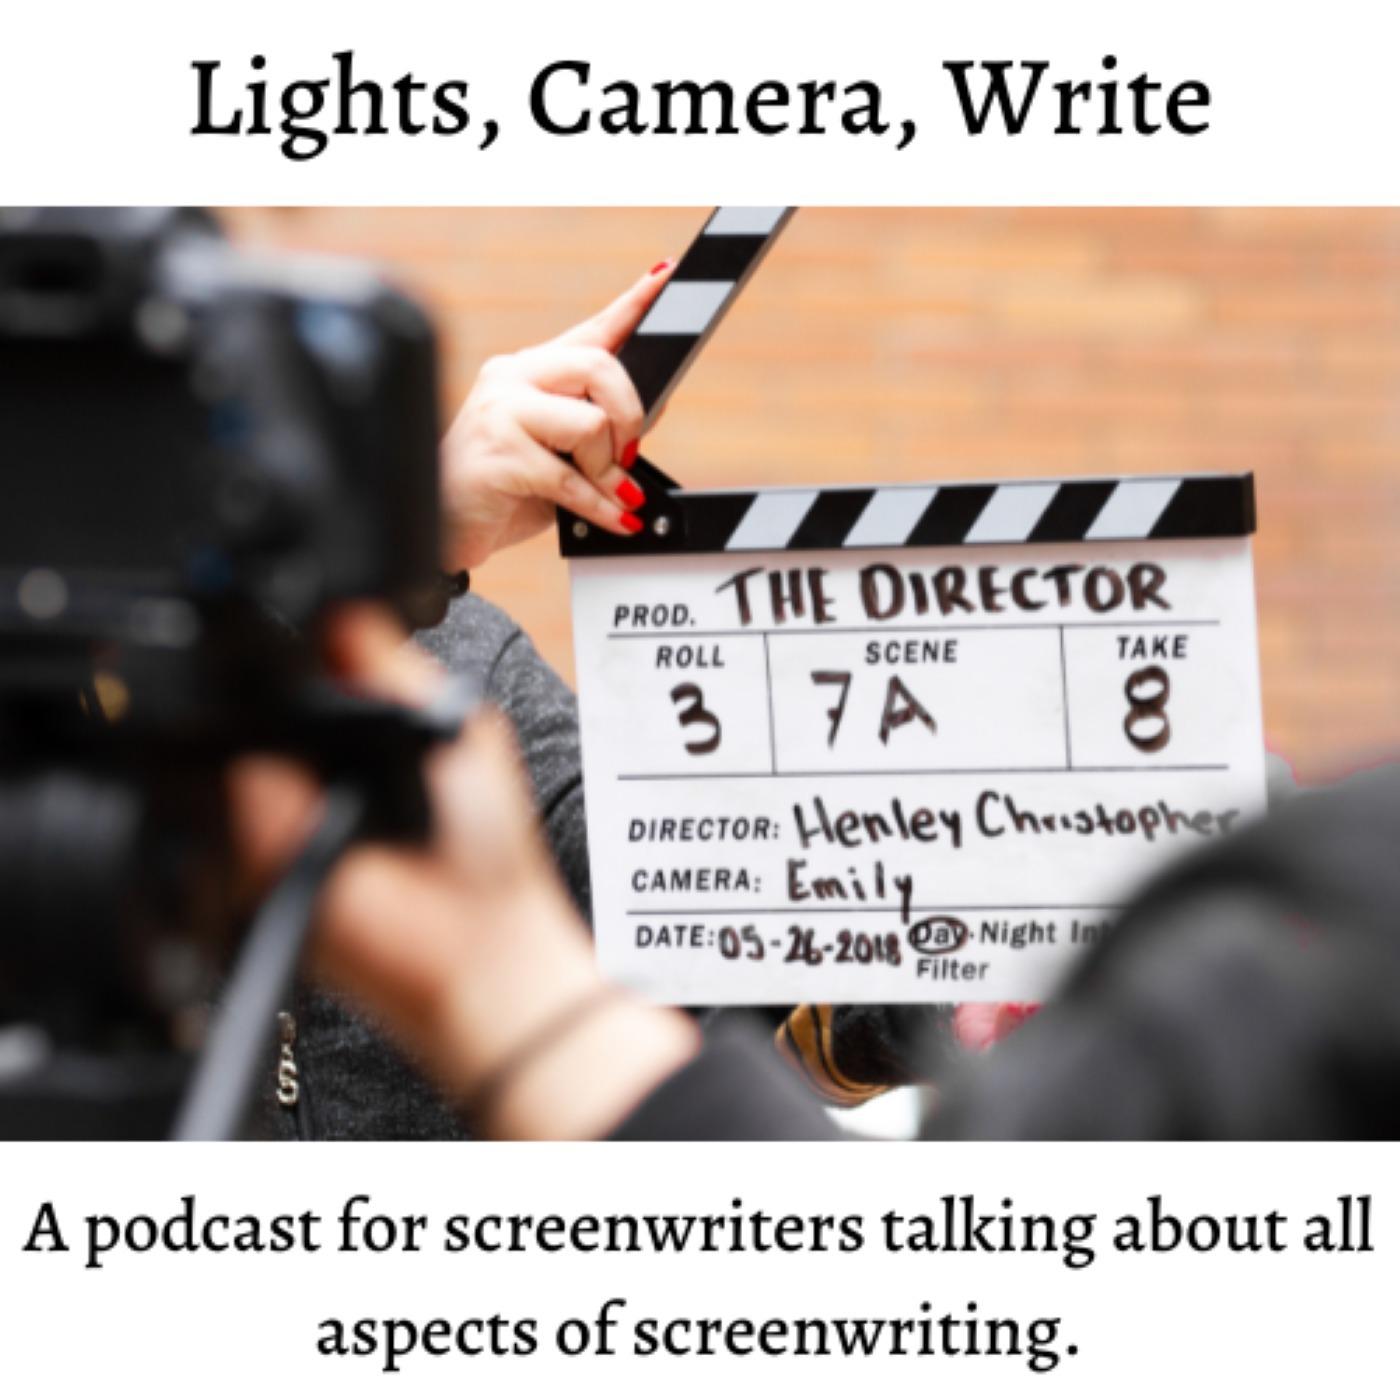 Lights, Camera, Write; A Podcast for Screenwriters Looking at All Aspects of Screenwriting